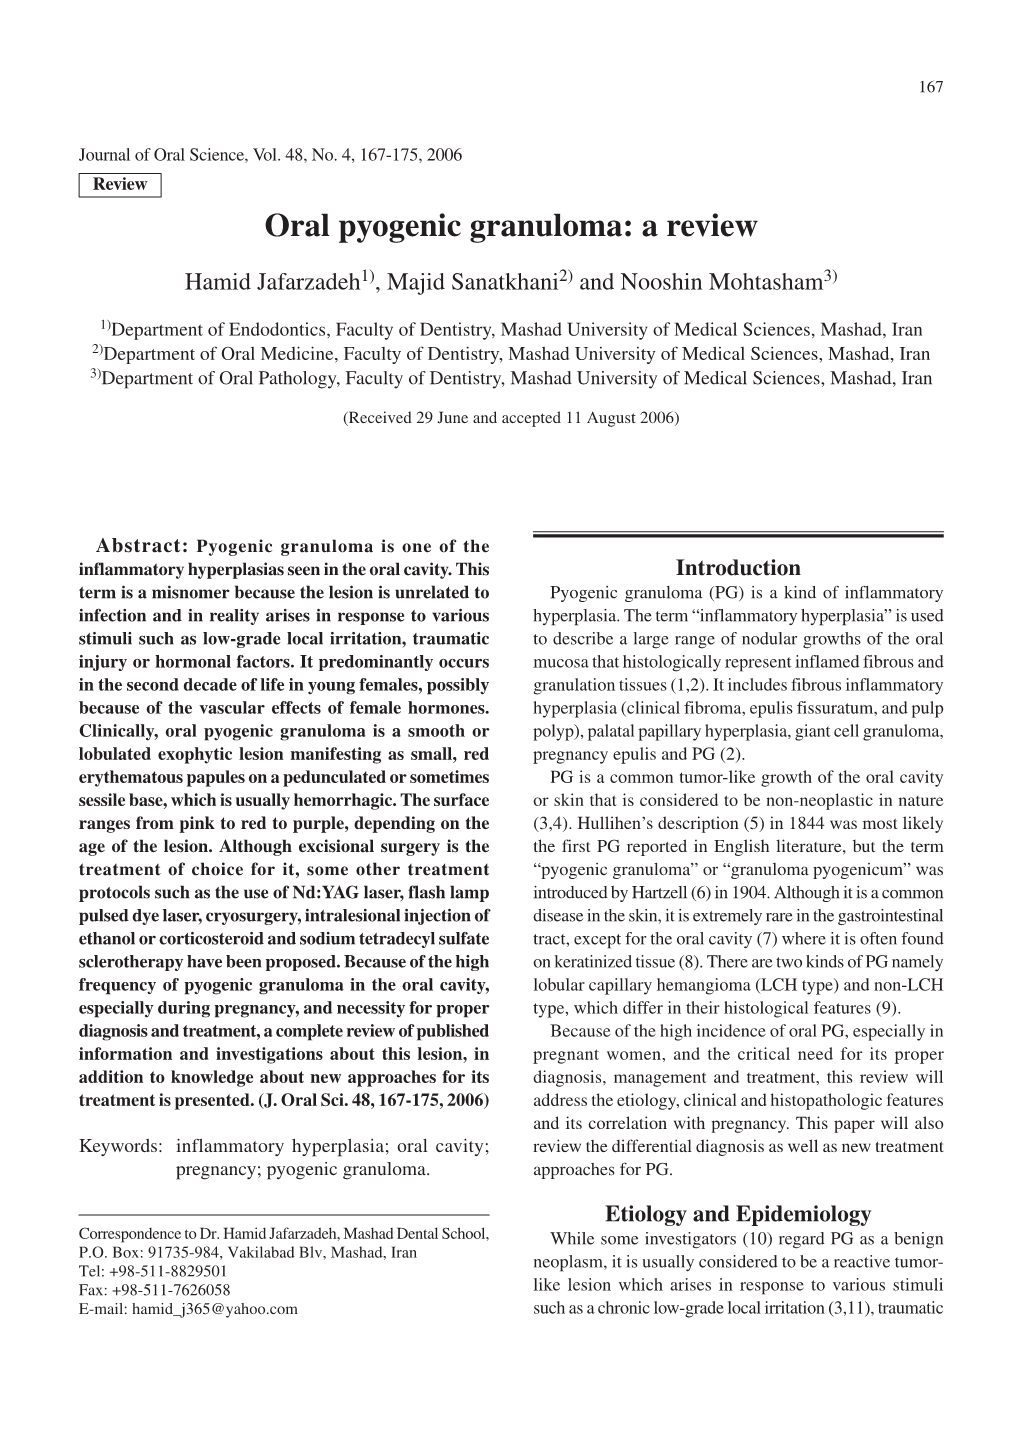 Oral Pyogenic Granuloma: a Review